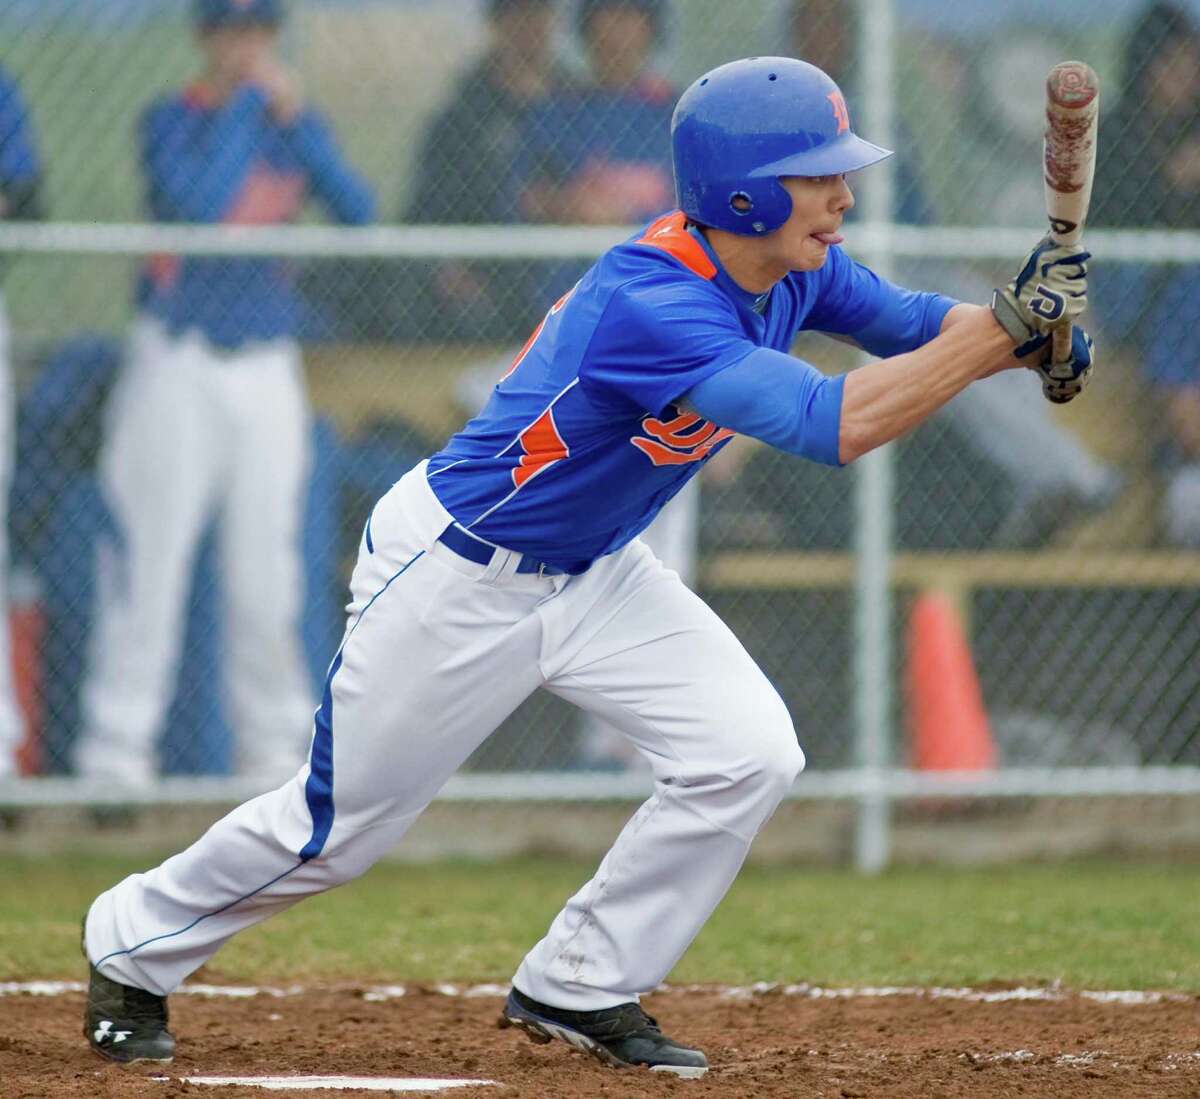 Danbury High School's Nick Goetz sets himself to drag a bunt during a game against Ridgefield High School, played at Danbury. Monday, April 29, 2013